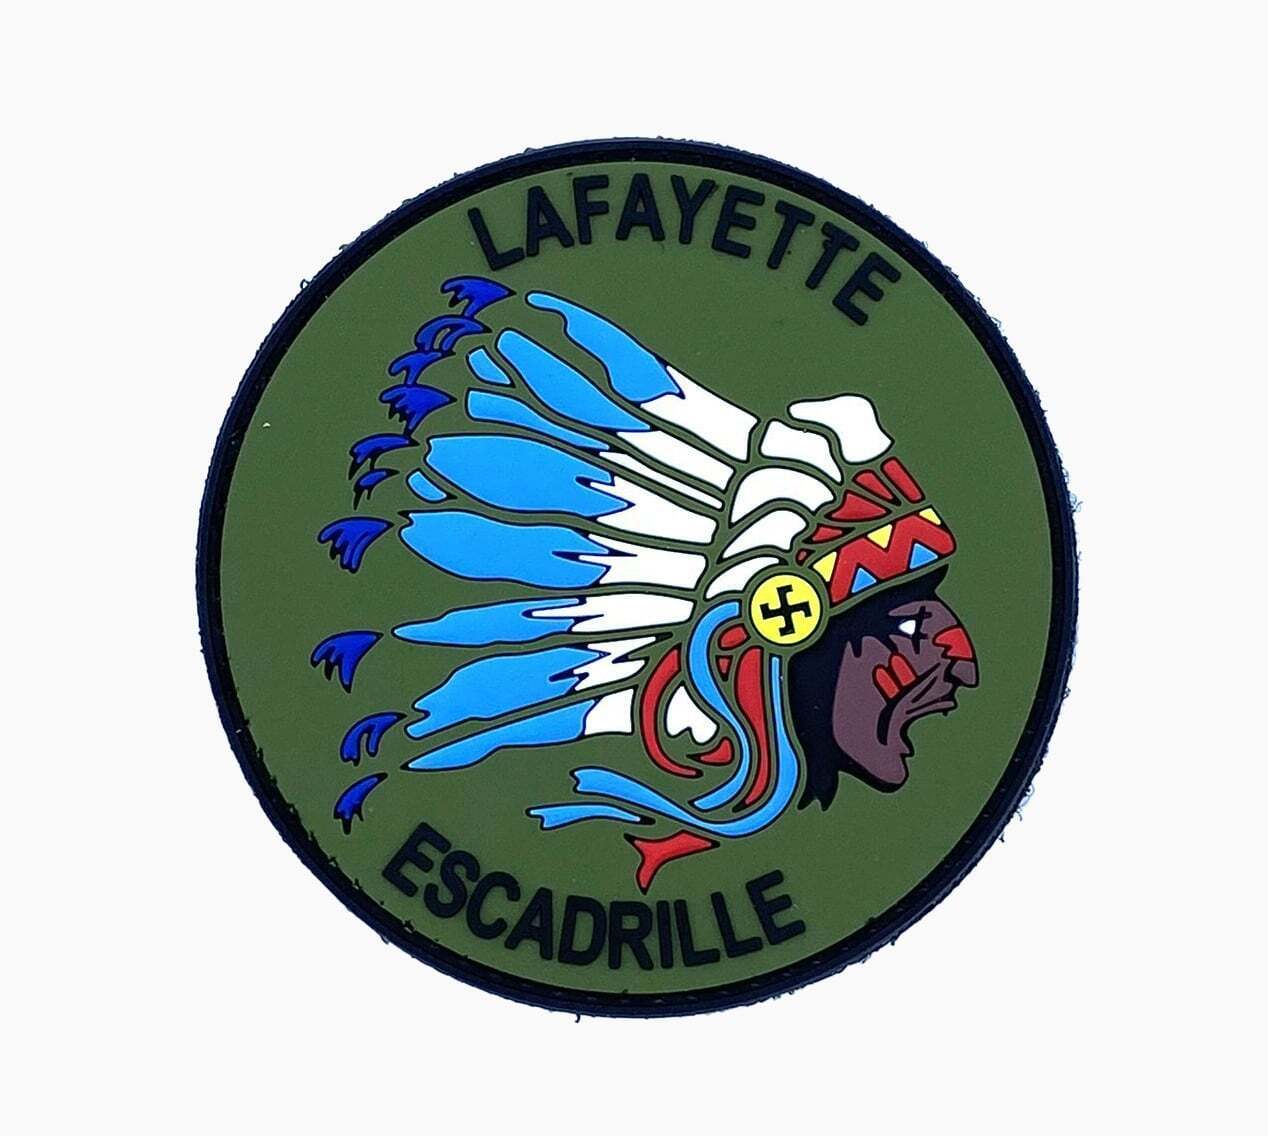 WW1 Lafayette Escadrille 1916 PVC Patch – With Hook and Loop